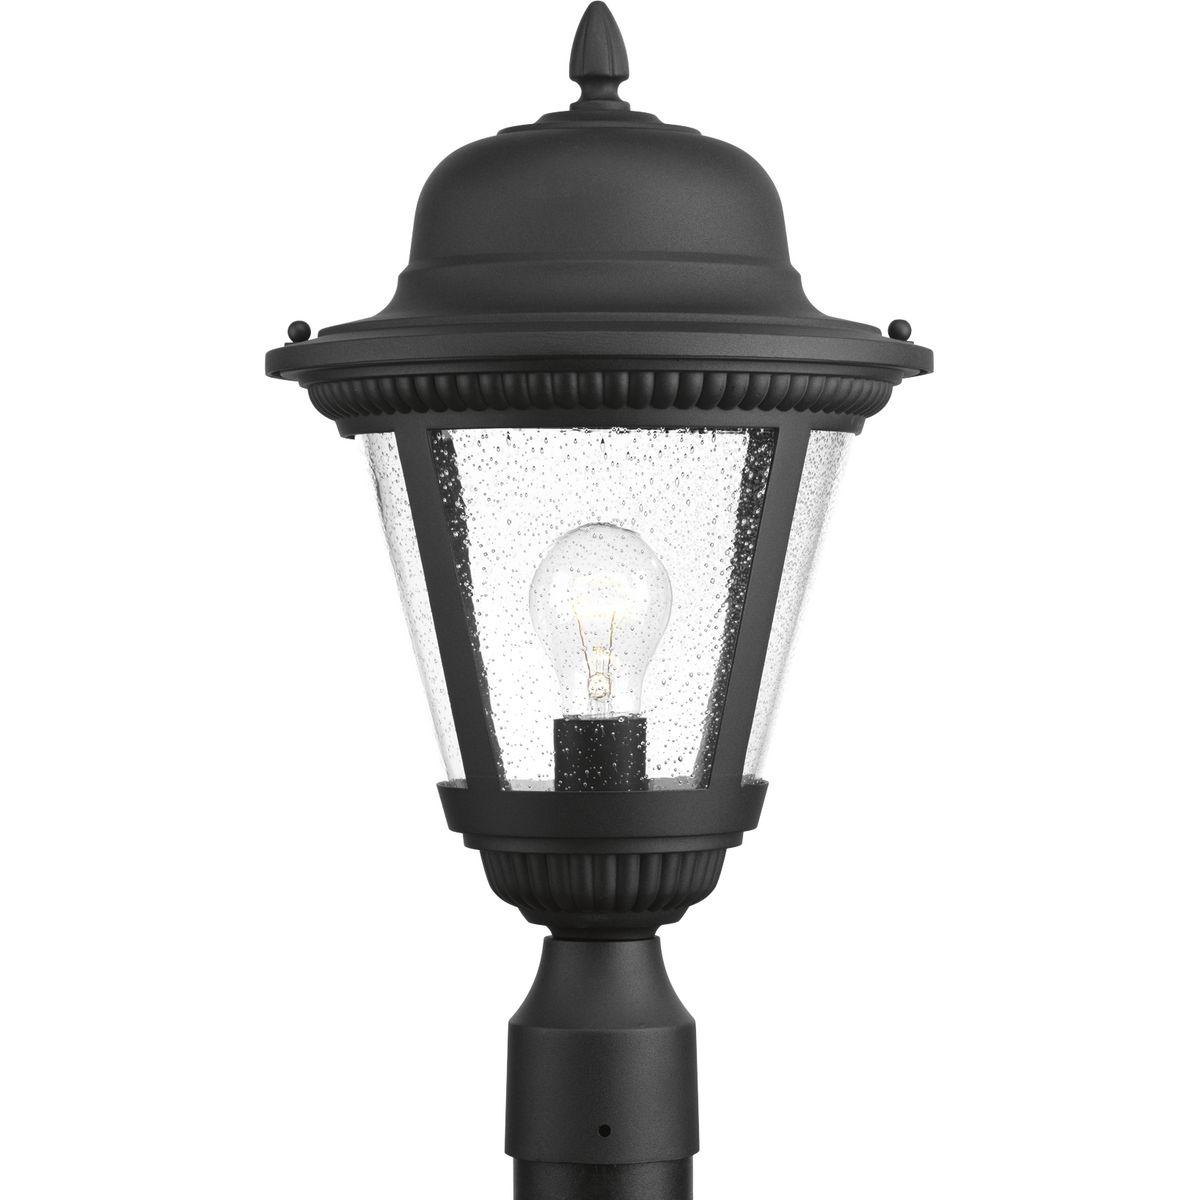 Hubbell P5458-31 Add a touch of rustic appeal and classic styling with beaded detailing in the Westport collection. Clear seeded glass compliments the durable powder coat finish in die-cast aluminum frames. One-light 11" post lantern. Black finish.  ; Rustic appeal with c